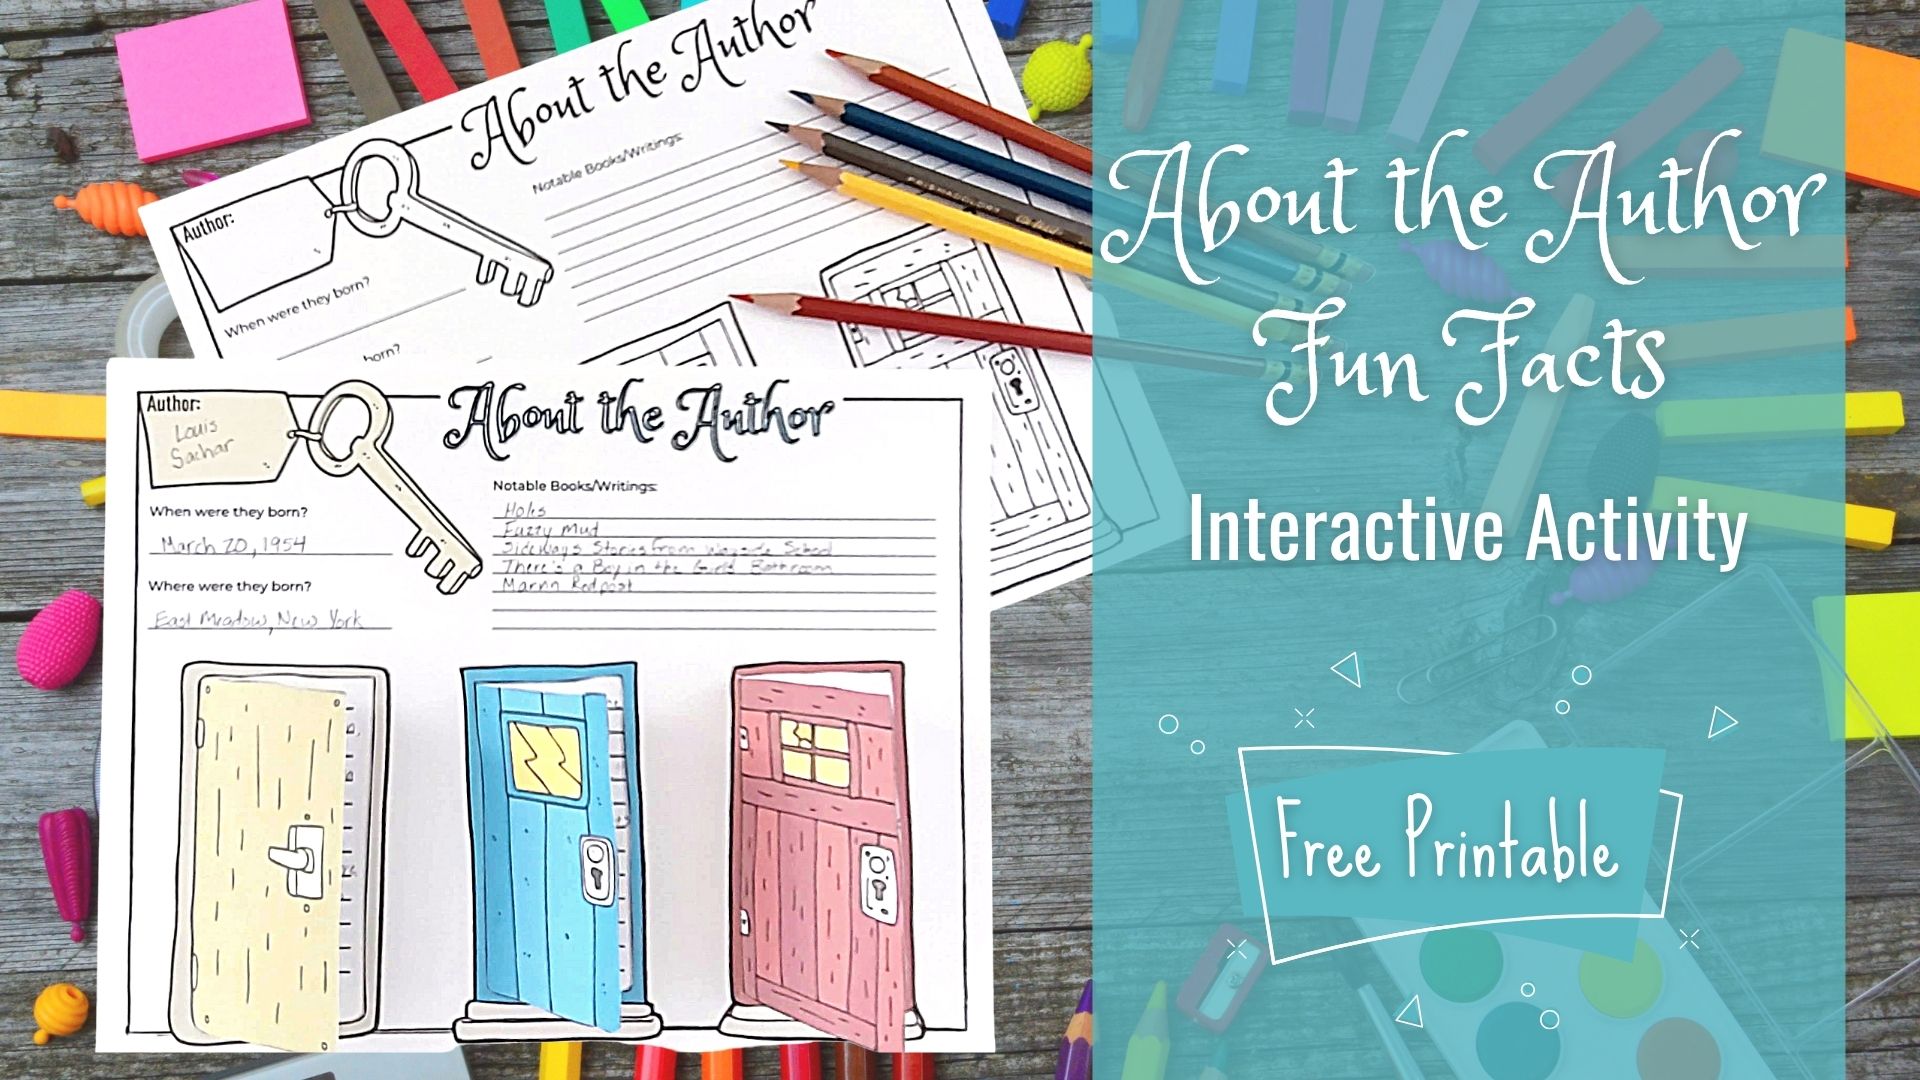 You are currently viewing About the Author Fun Facts Printable